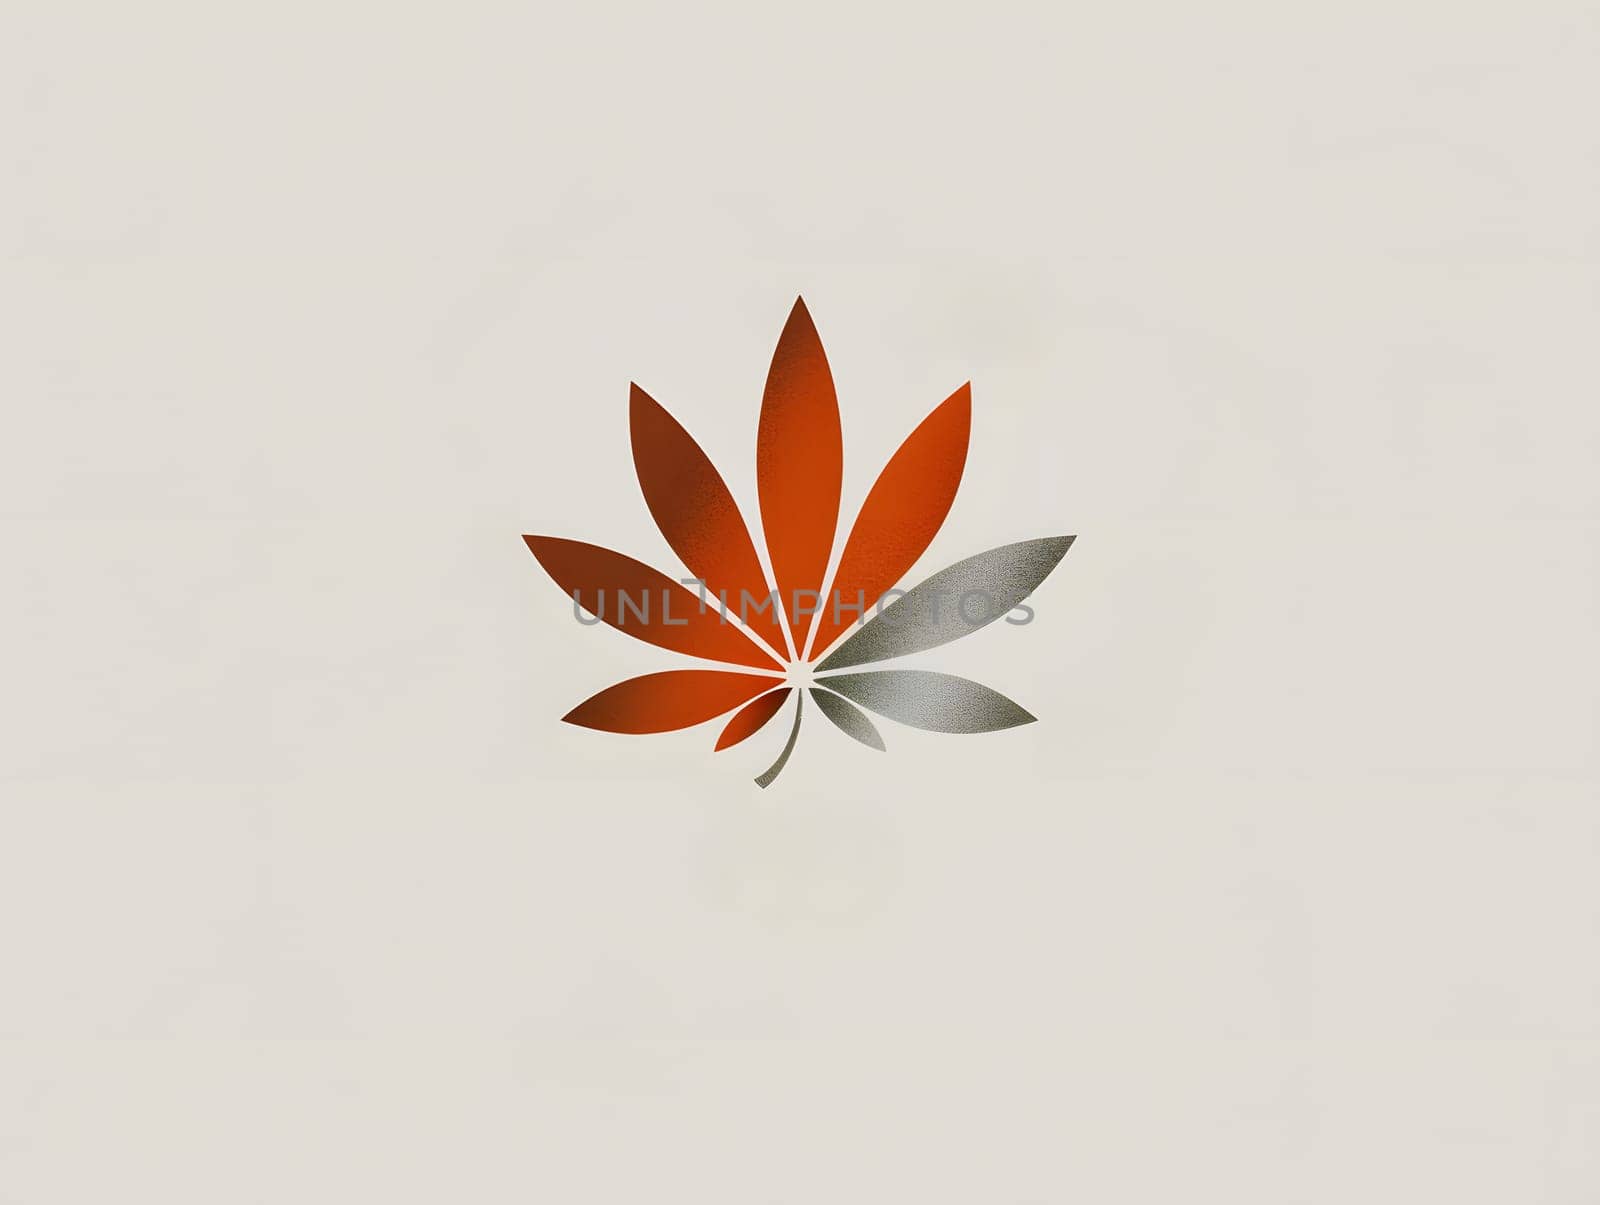 A creative arts logo featuring a red and silver leaf on a white background by Nadtochiy